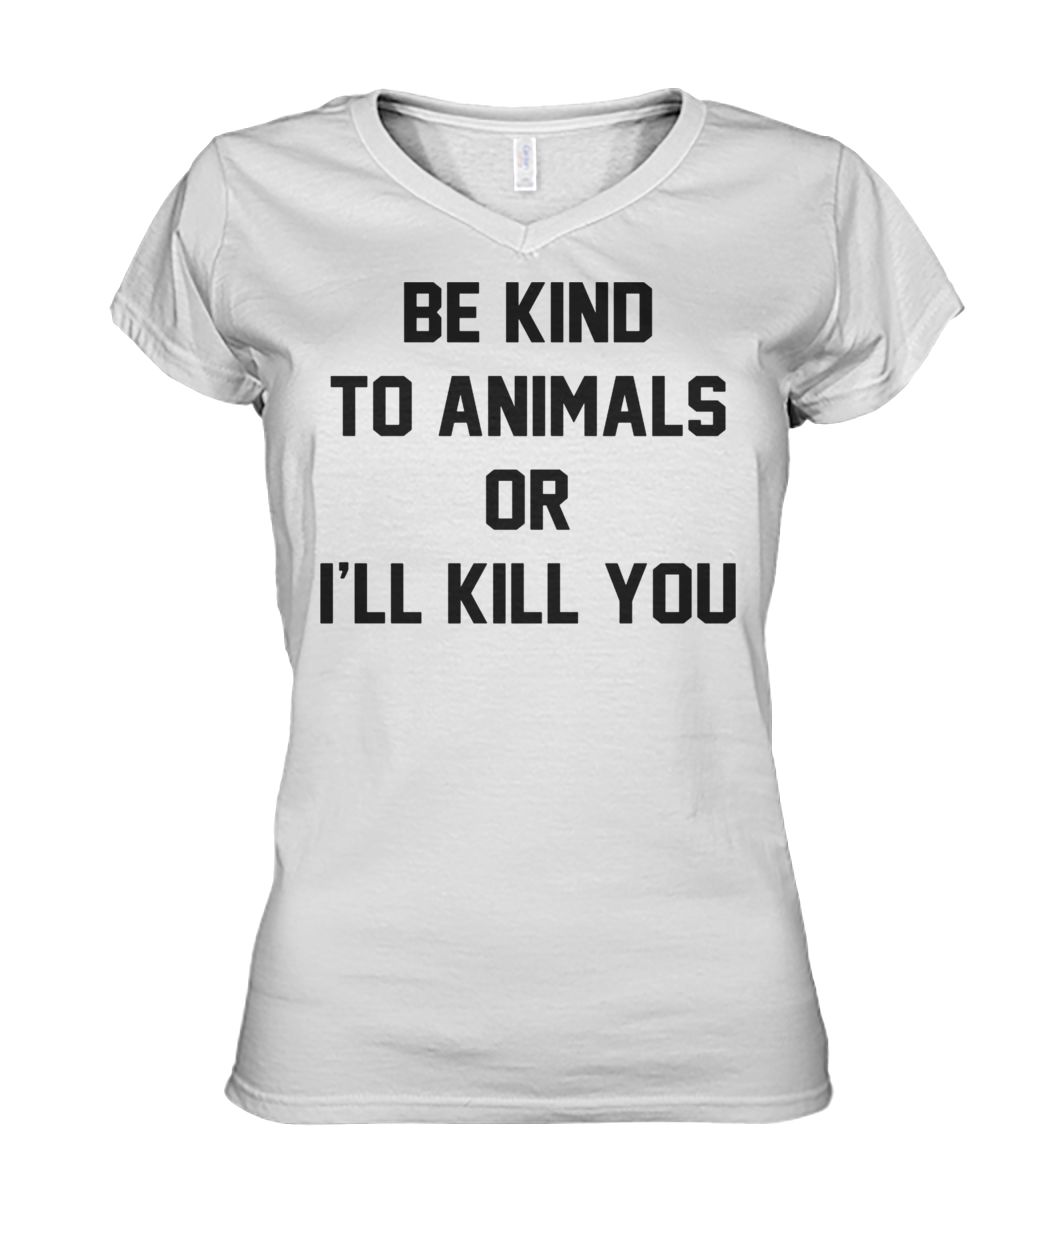 Be kind to animals or I'll kill you animal rights women's v-neck